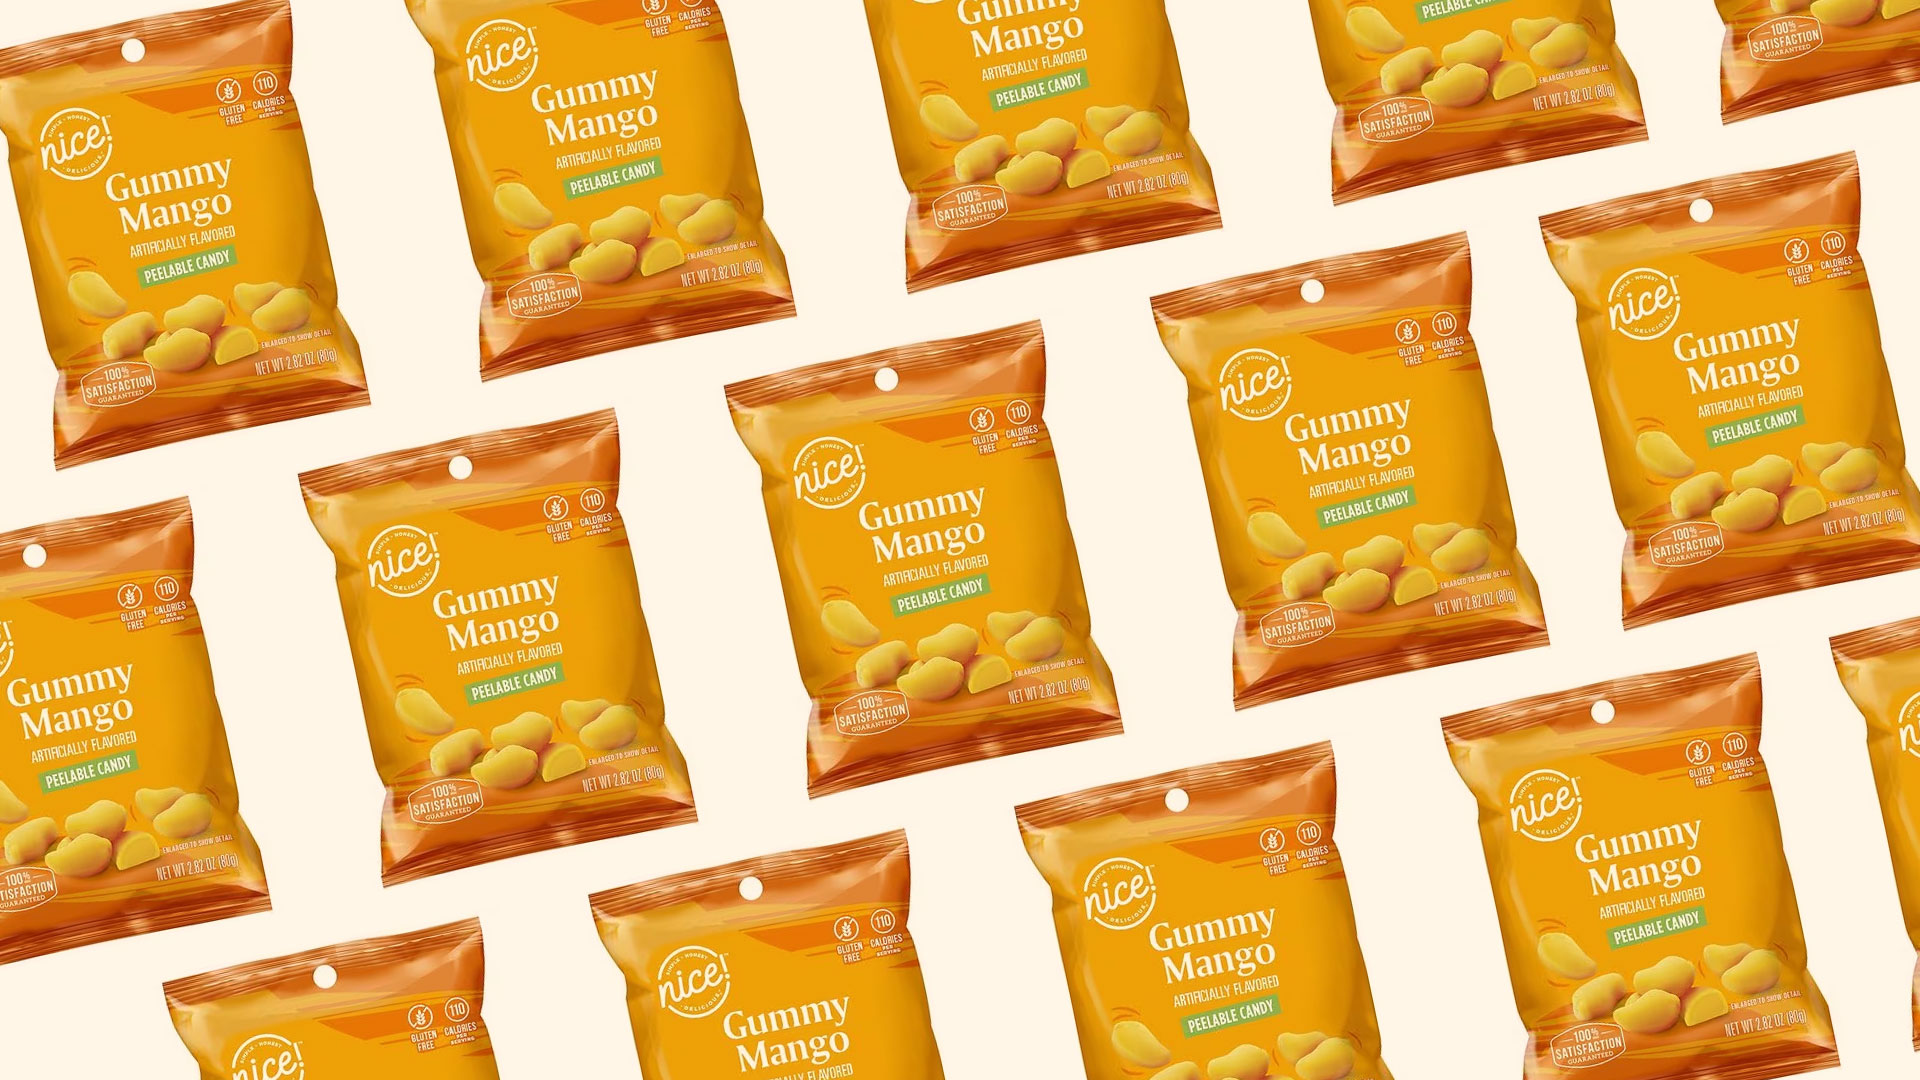 Walgreens’ Mango Gummies Have Became a Must-Have Snack Among Millions Across America